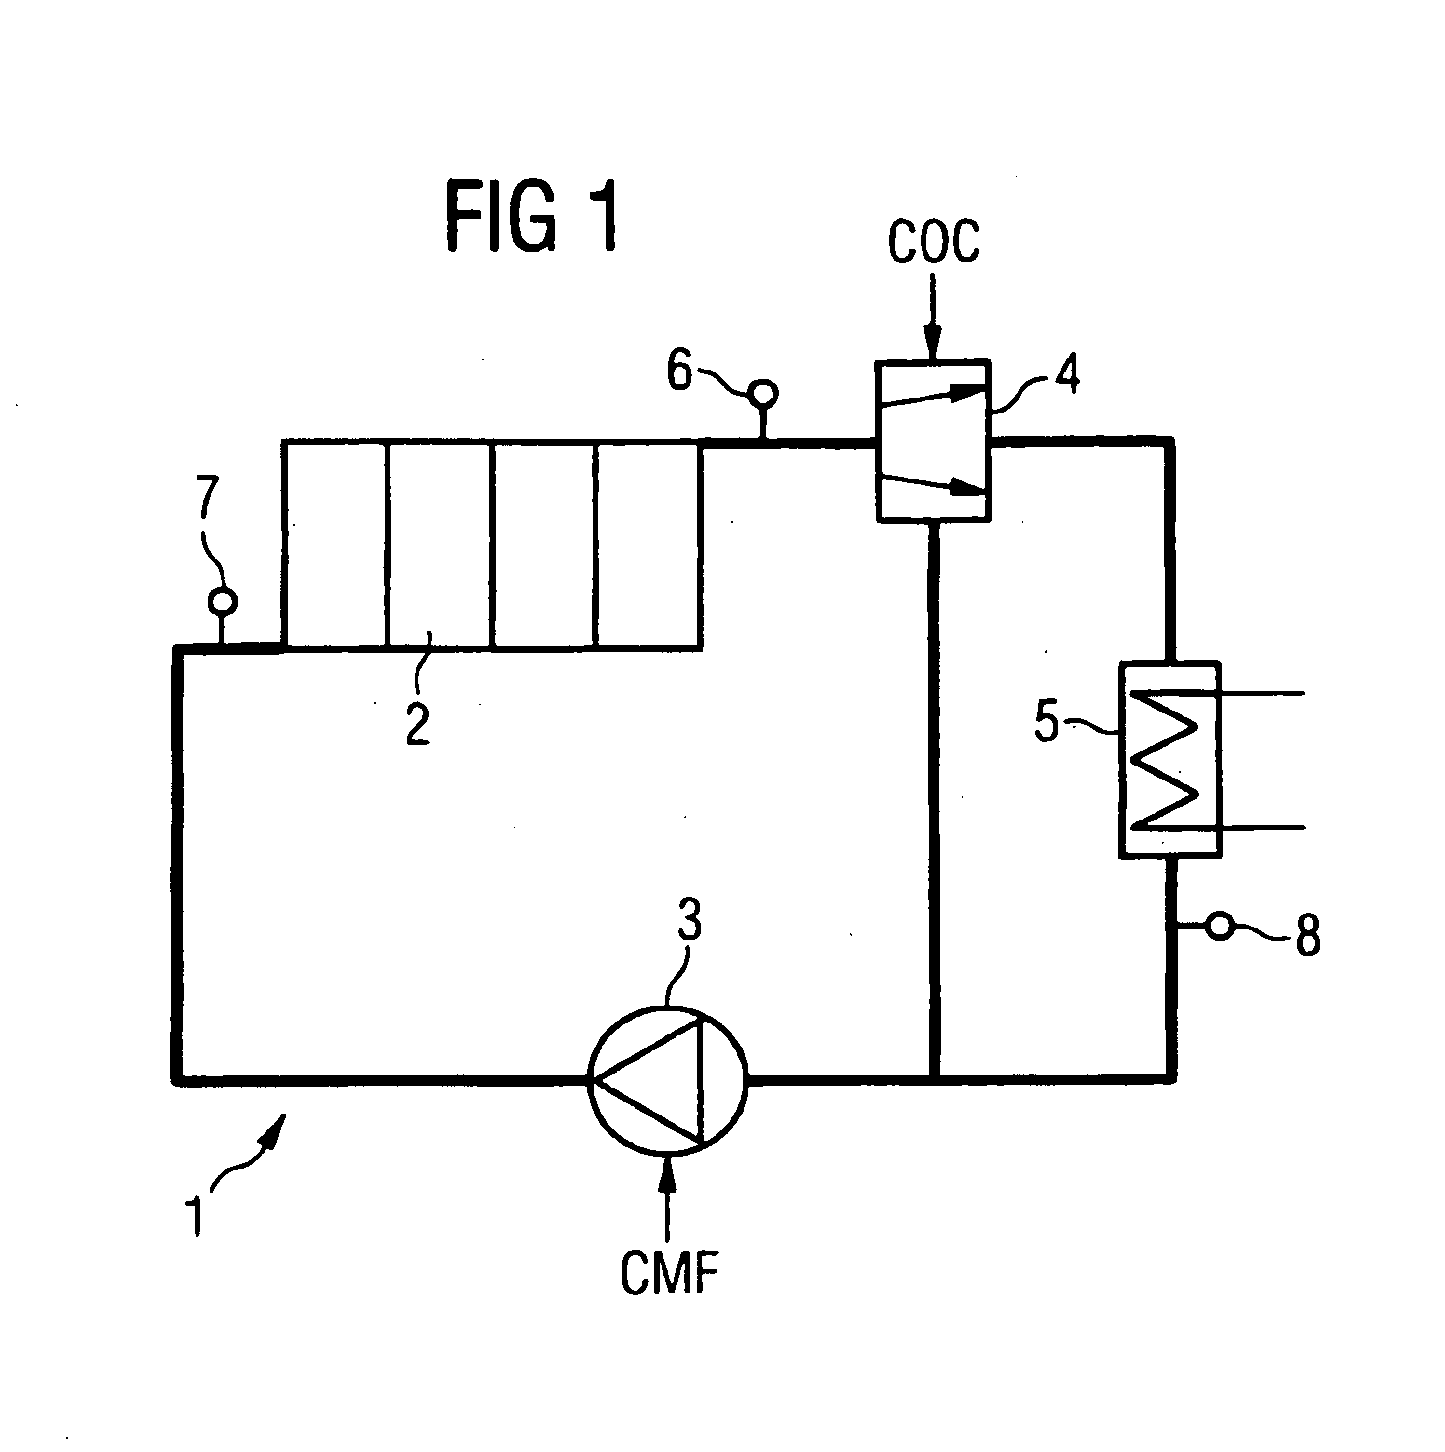 Method for adjusting coolant temperature in an internal combustion engine